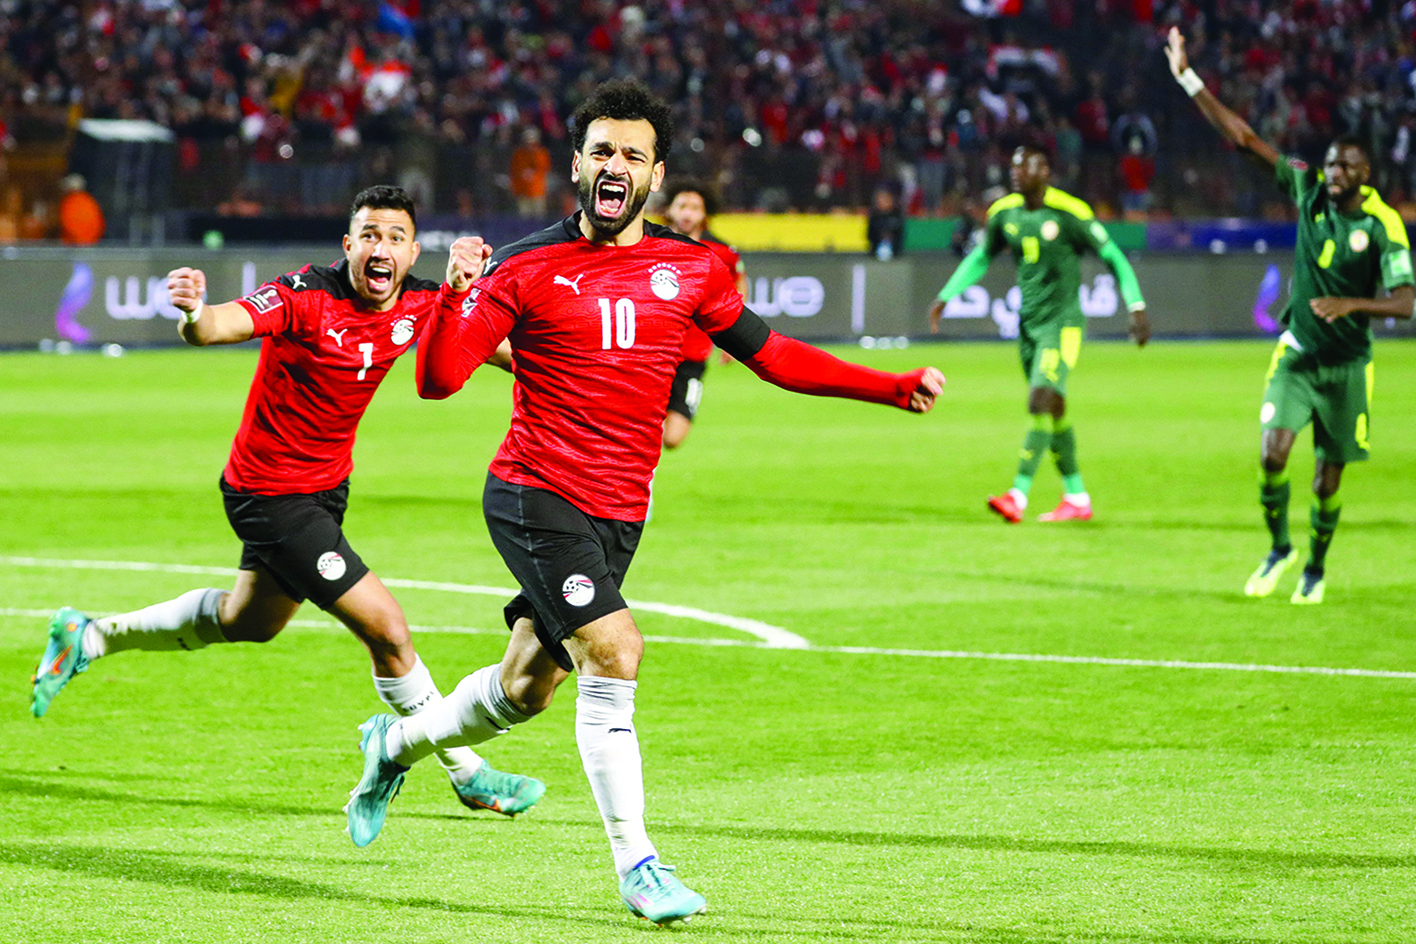 CAIRO:  Egypt's forward Mohamed Salah (right) and Egypt's midfielder Mahmoud 'Trezeguet' Hassan (left) celebrate after a goal during the 2022 Qatar World Cup African Qualifiers football match between Egypt and Senegal on March 25, 2022. - AFP